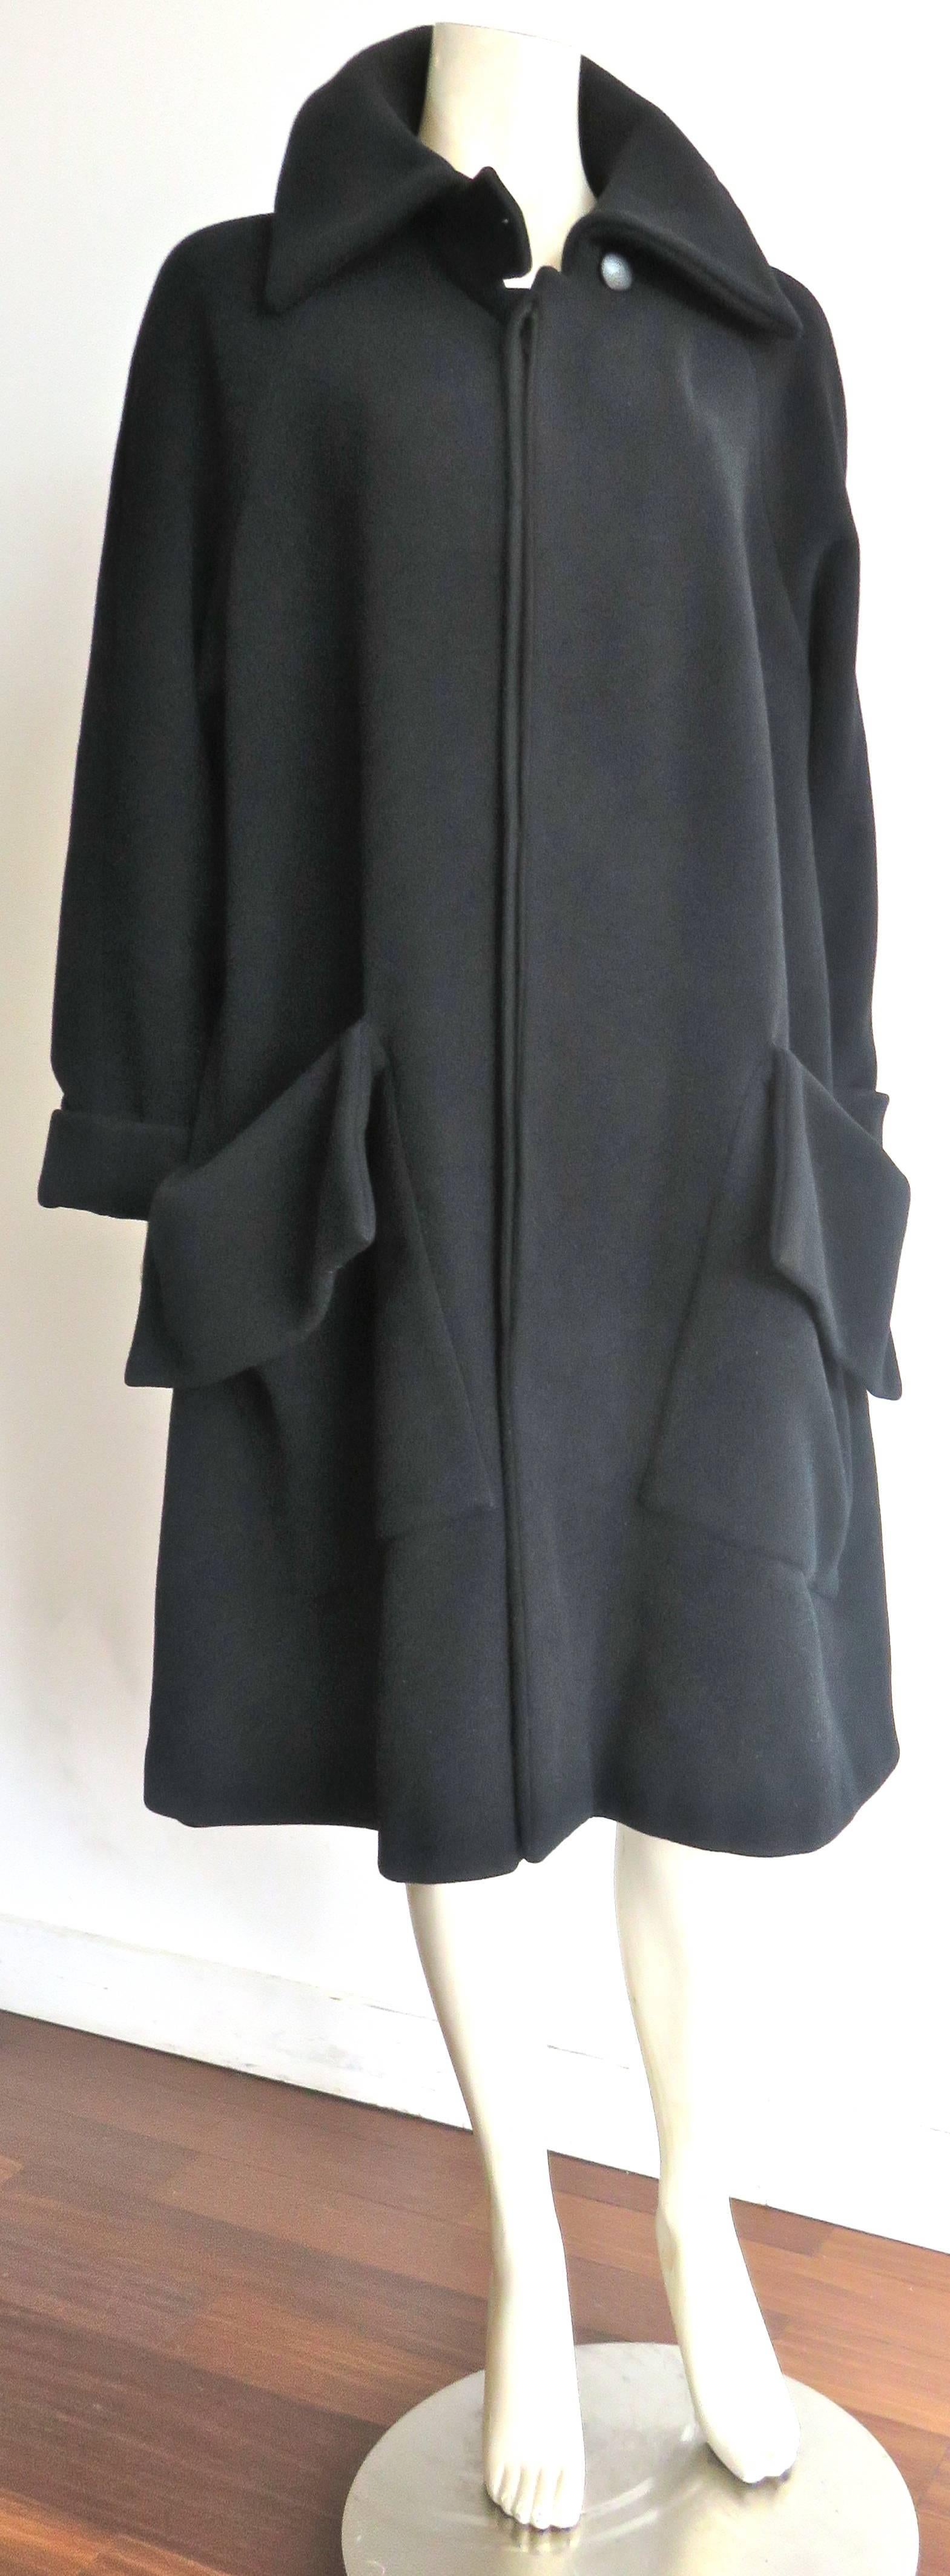 Gorgeous, 1990's YOHJI YAMAMOTO Black wool flap detail coat.

Oversized, loose fit silhouette with exaggerated flap detail pockets at the front waist.

Concealed, button front placket opening.

Large shape collar.

Made in Japan, as